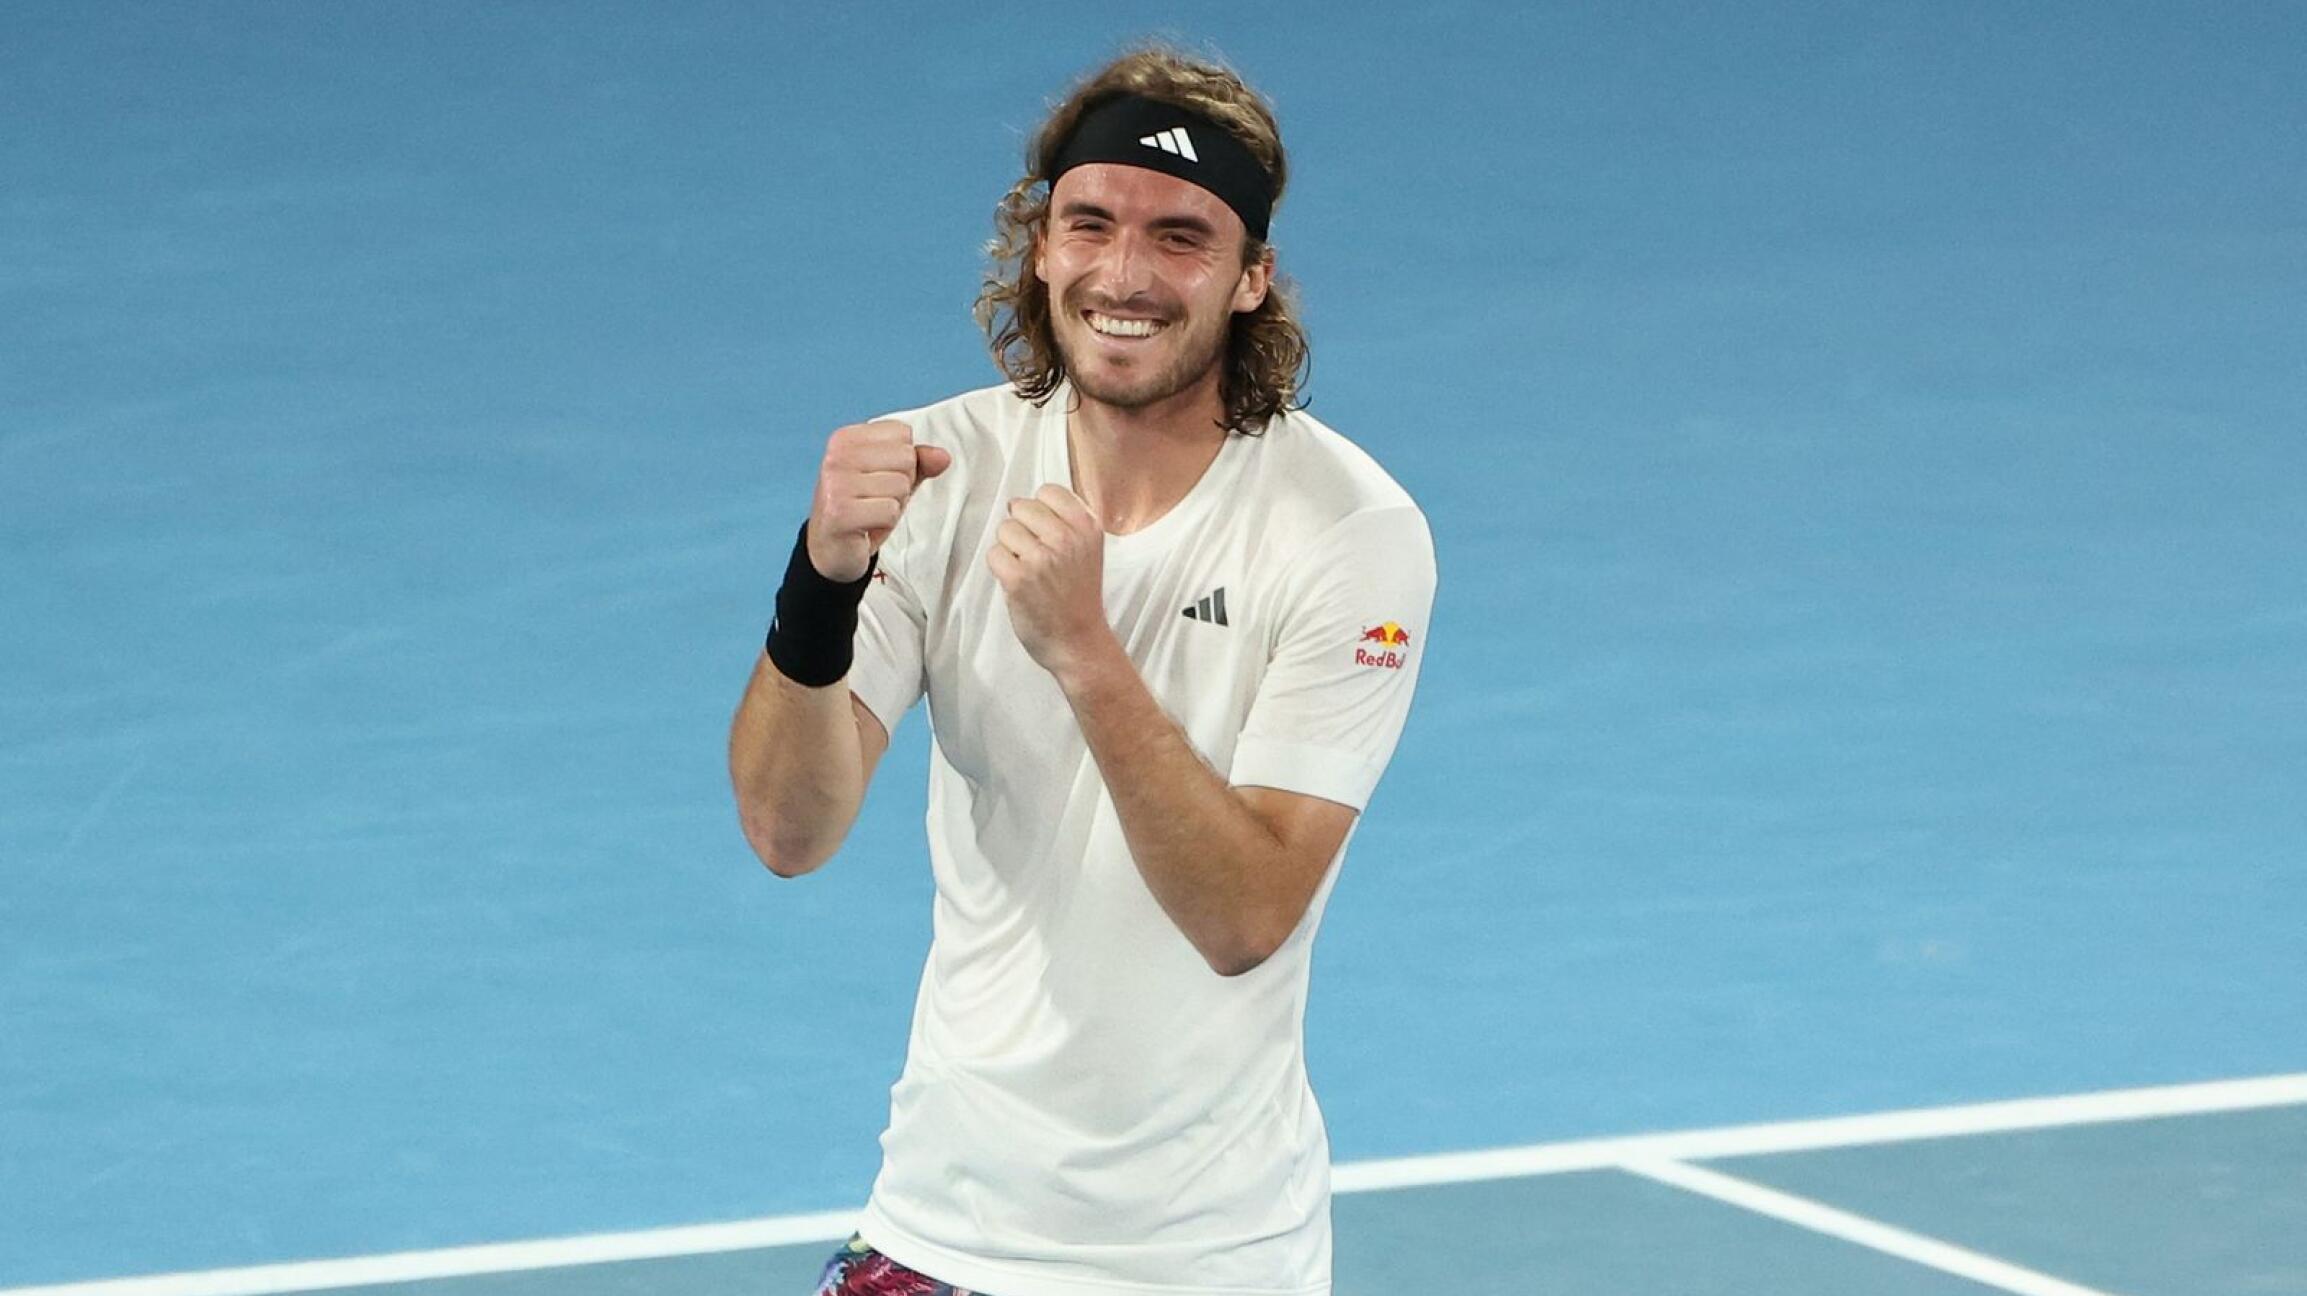 Greece's Stefanos Tsitsipas celebrates after his victory over Italy's Jannik Sinner at the Australian Open in Melbourne on Sunday. Photo: Martin Keep/AFP